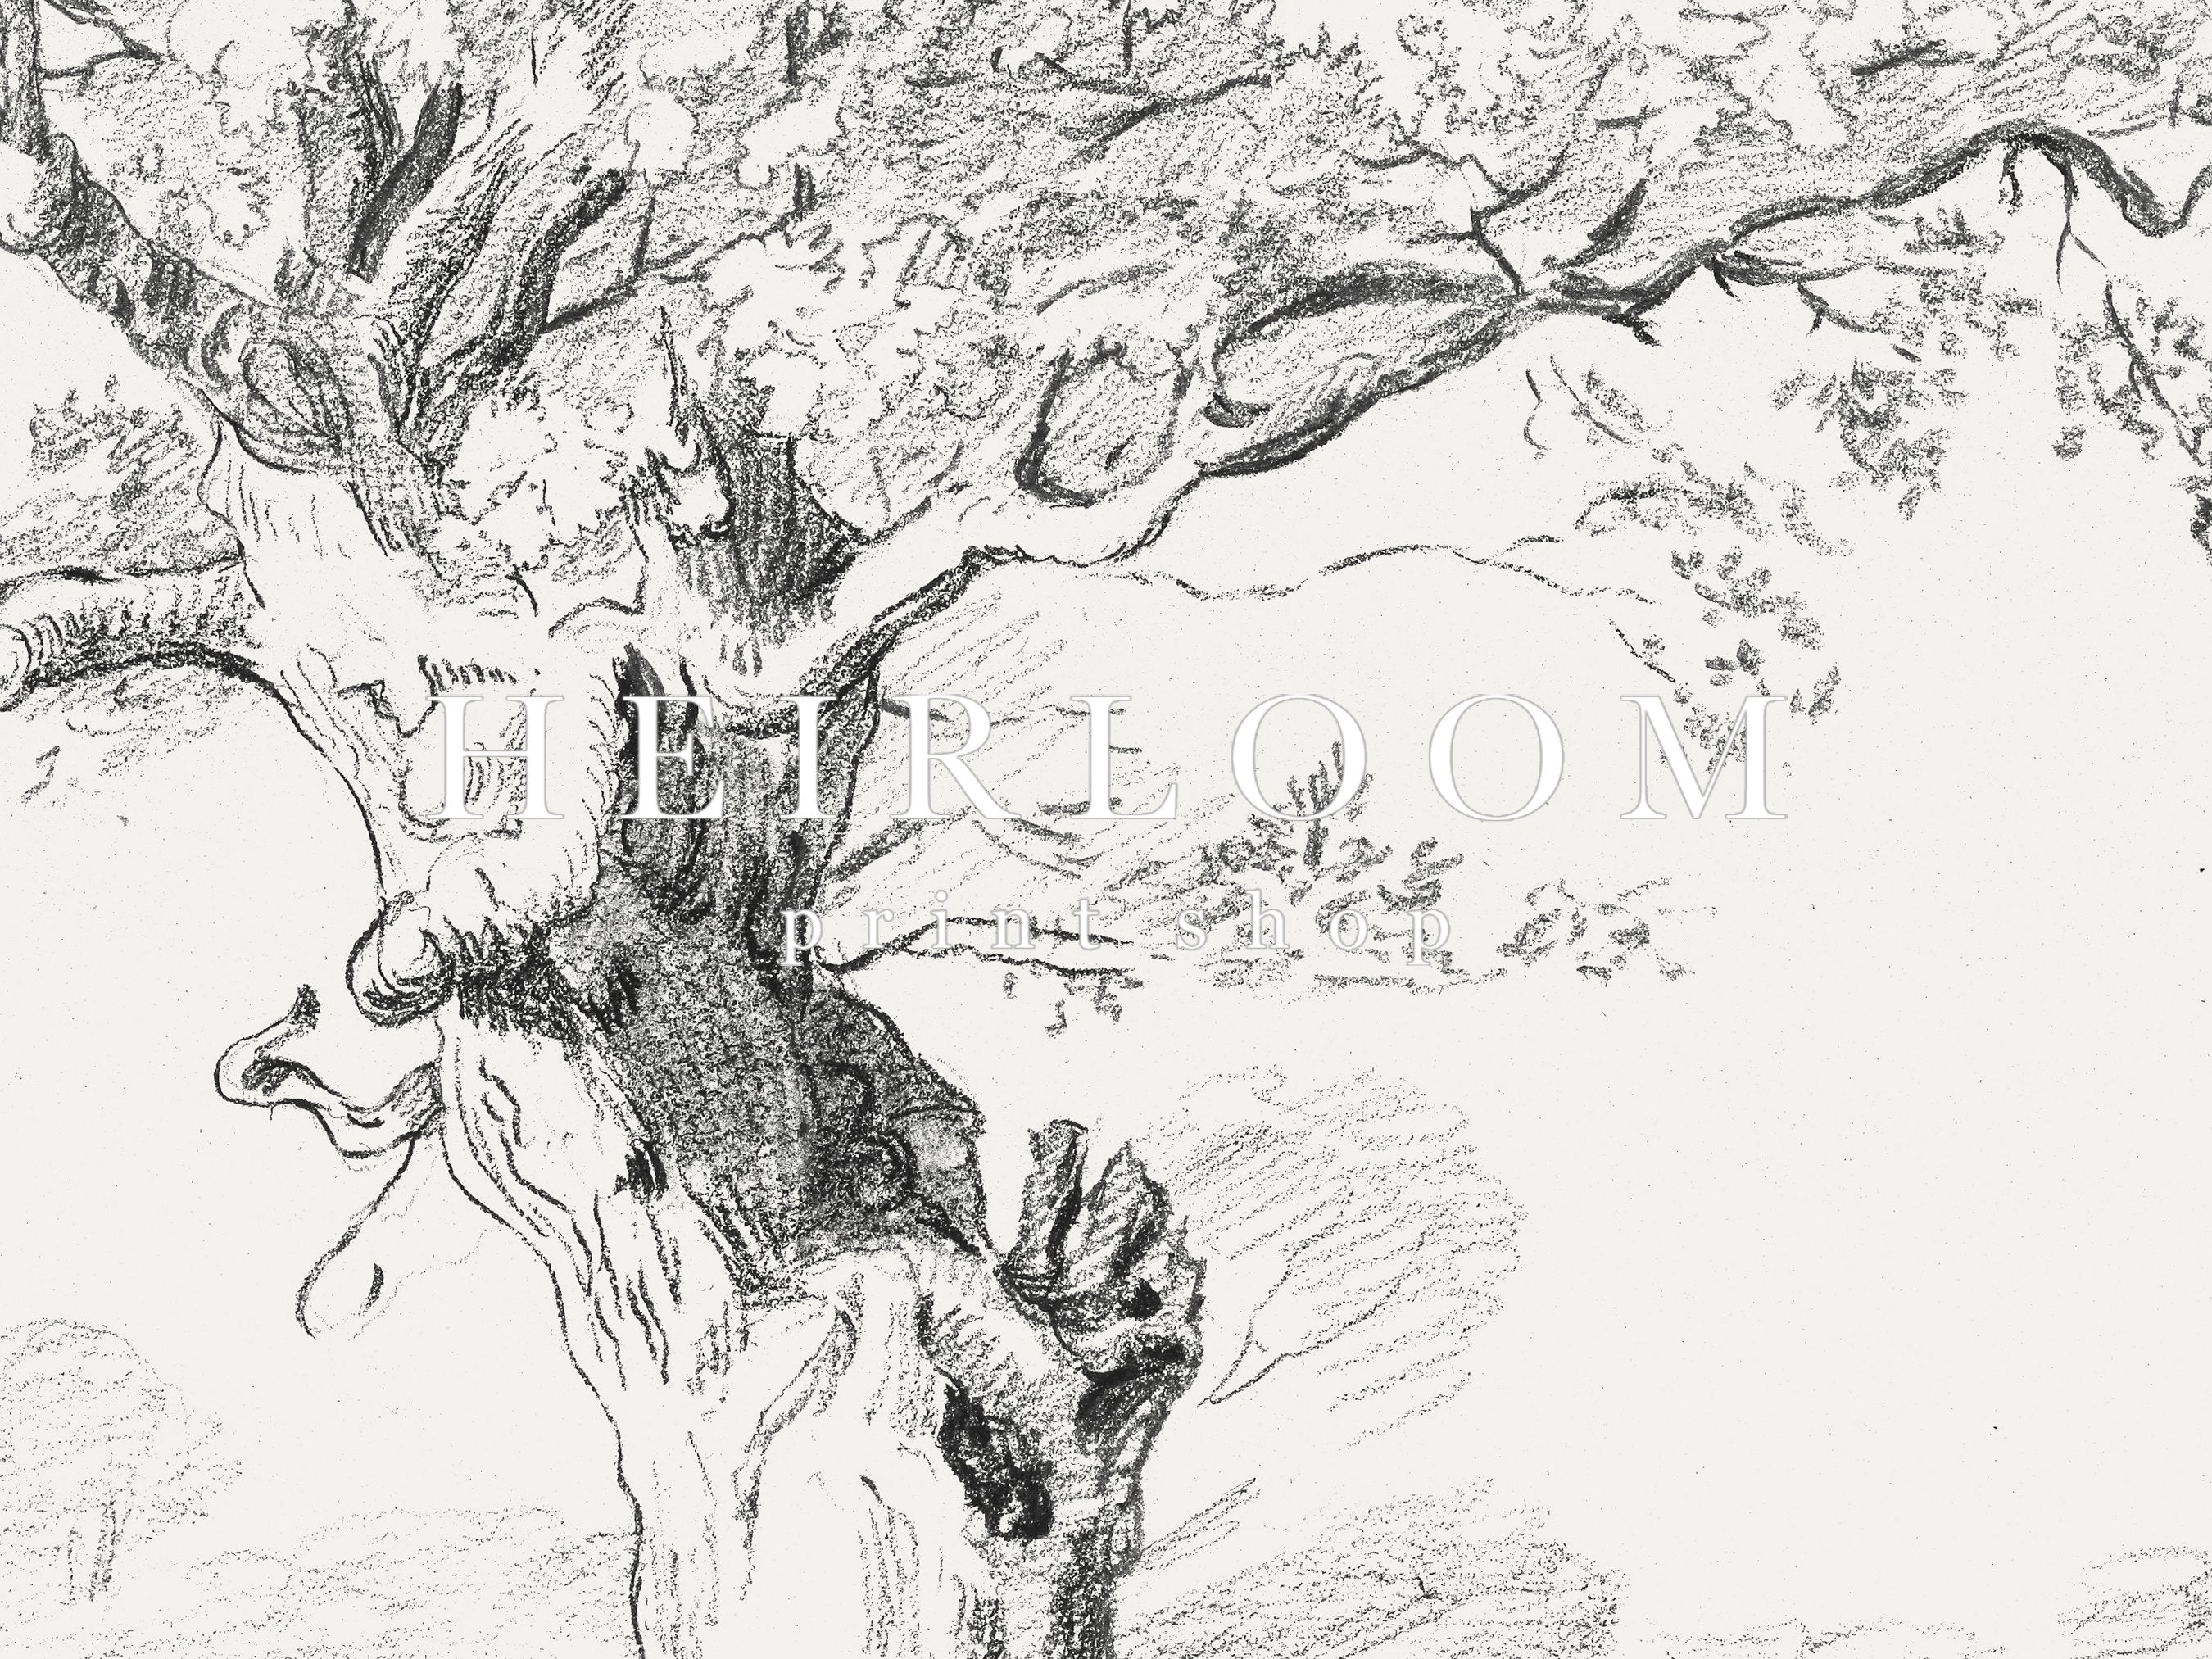 How to Draw an Oak Tree: Pencil Drawing Fast Version - YouTube